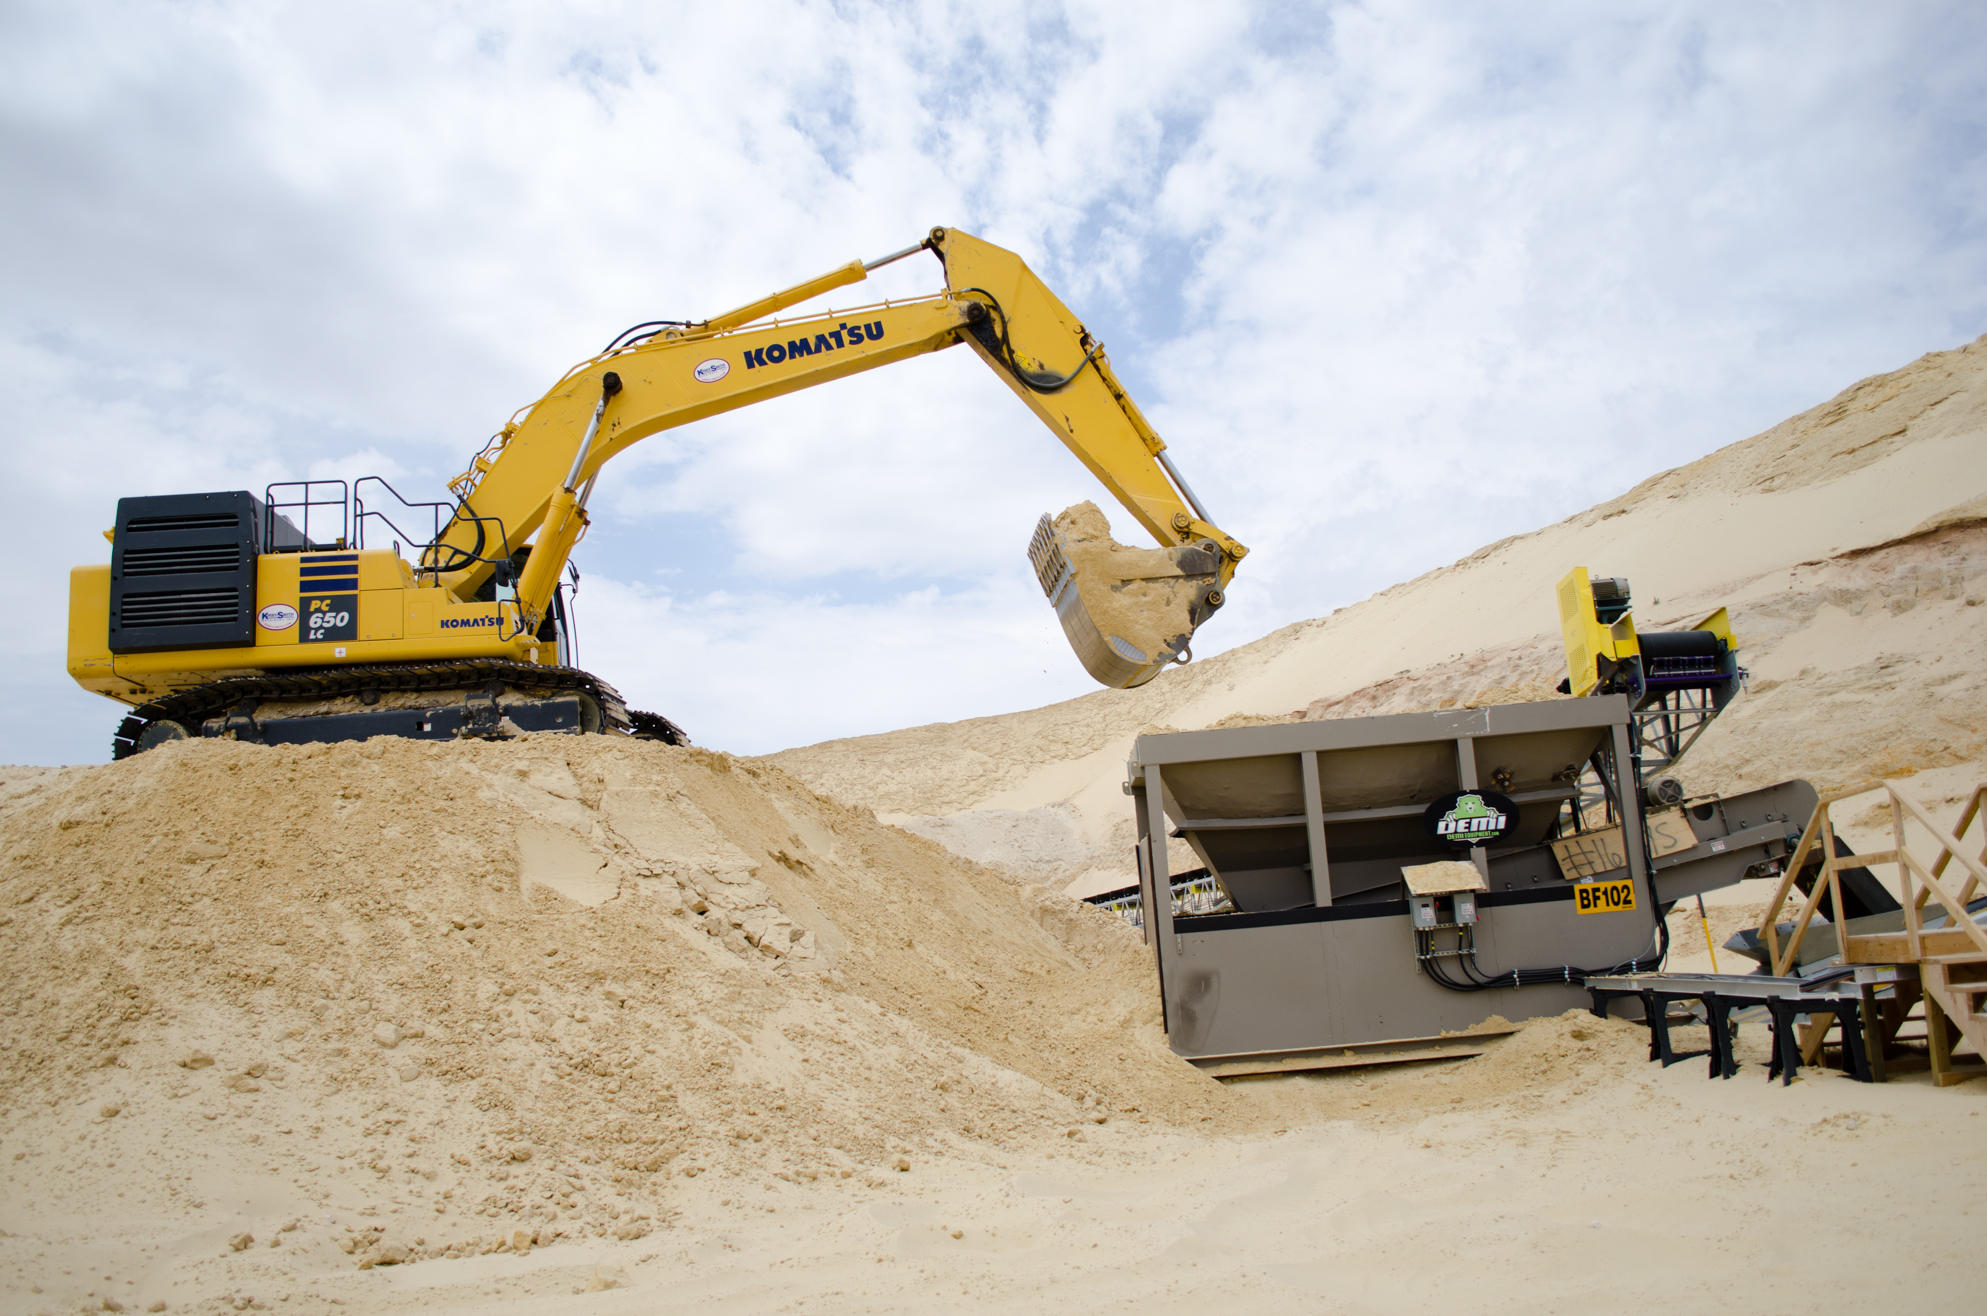 Machines harvest frac sand at the Black Mountain Sand company’s mine in Kermit, Texas.

